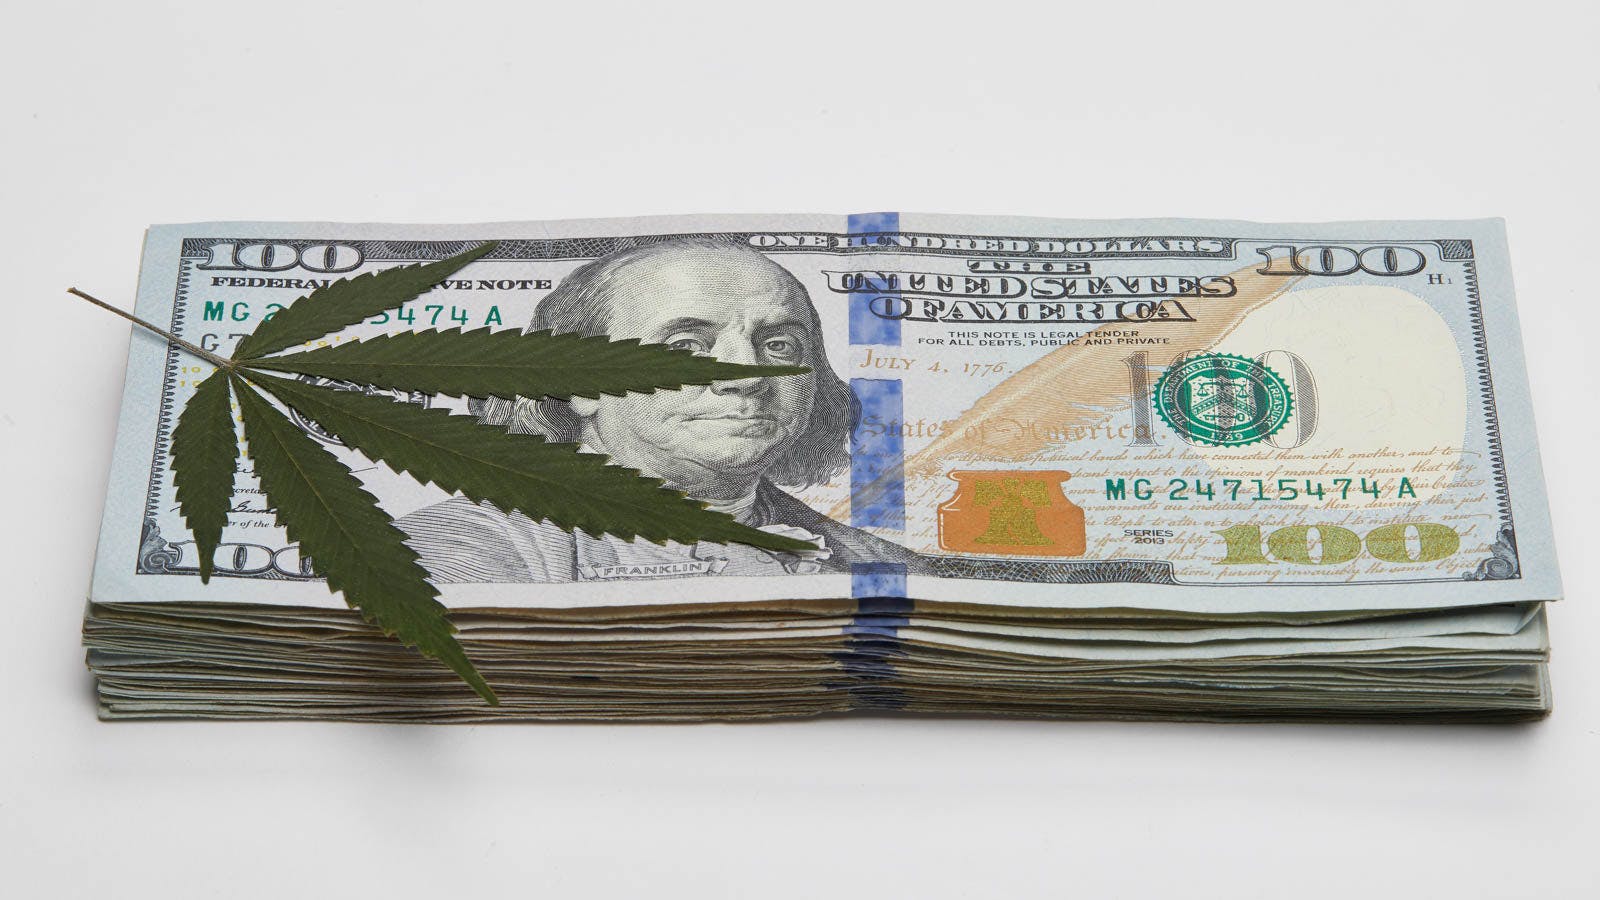 How Much Does CBD Oil Cost?